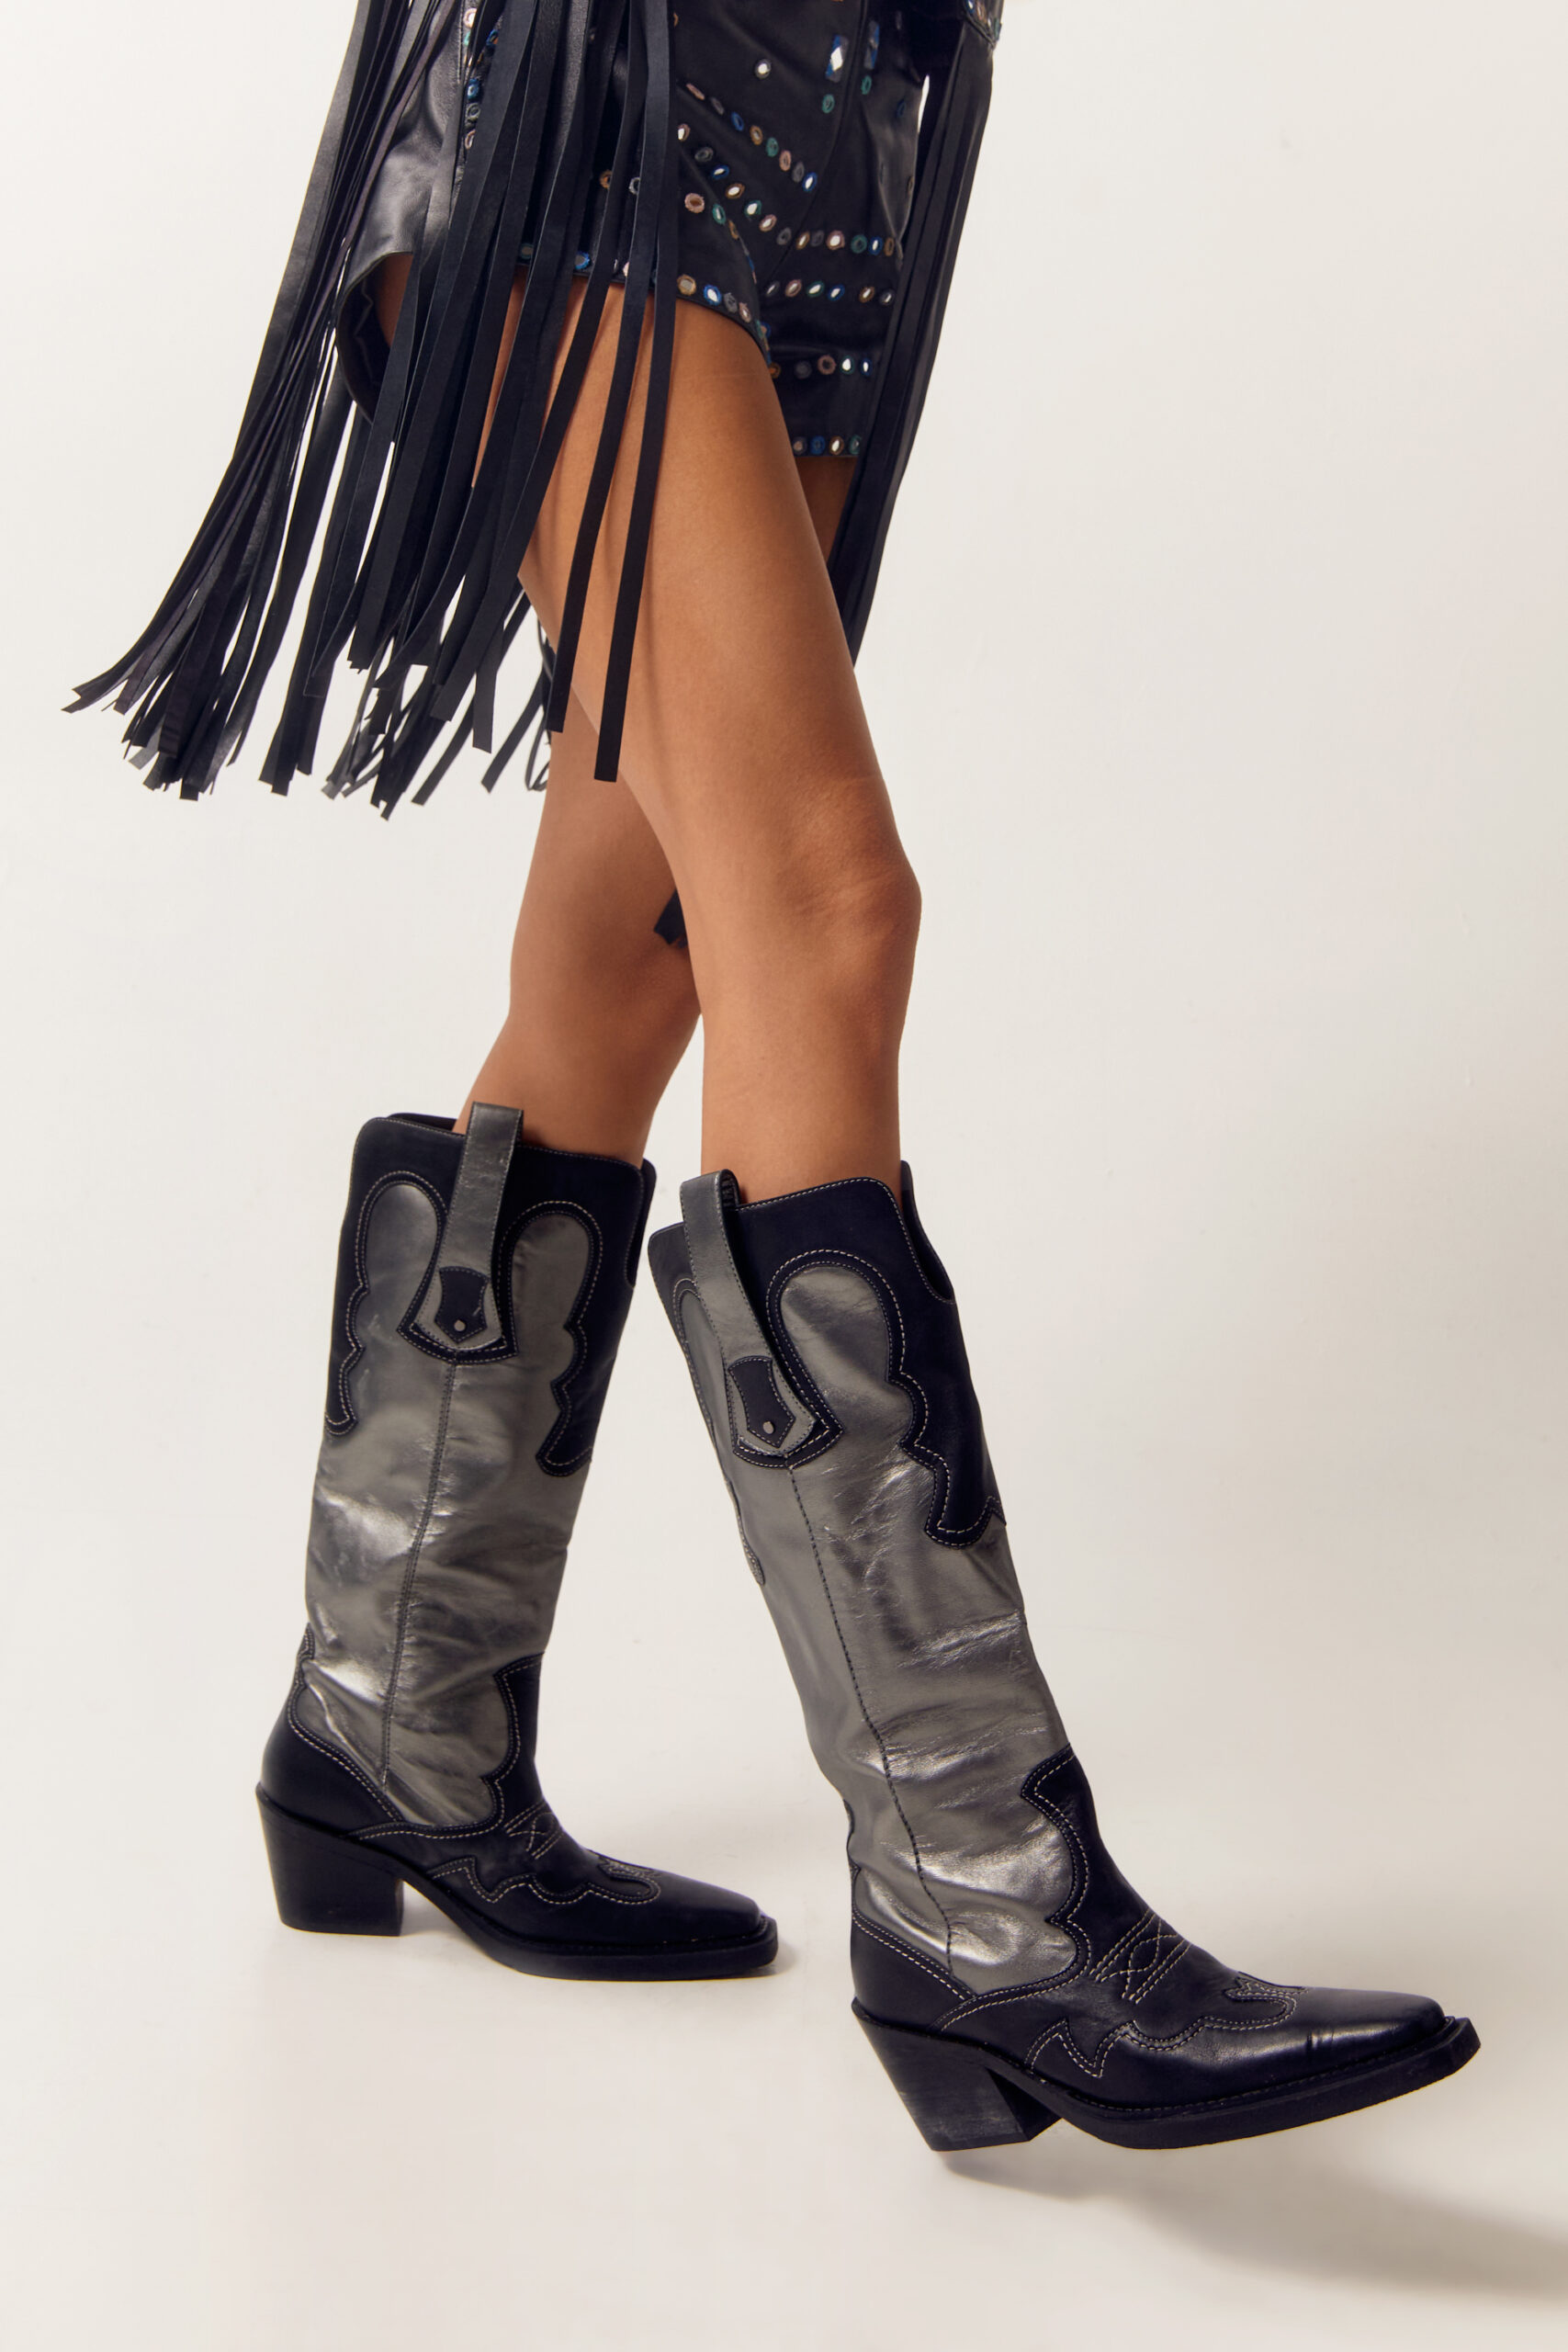 Real Leather Metallic Color Block Cowboy Boots